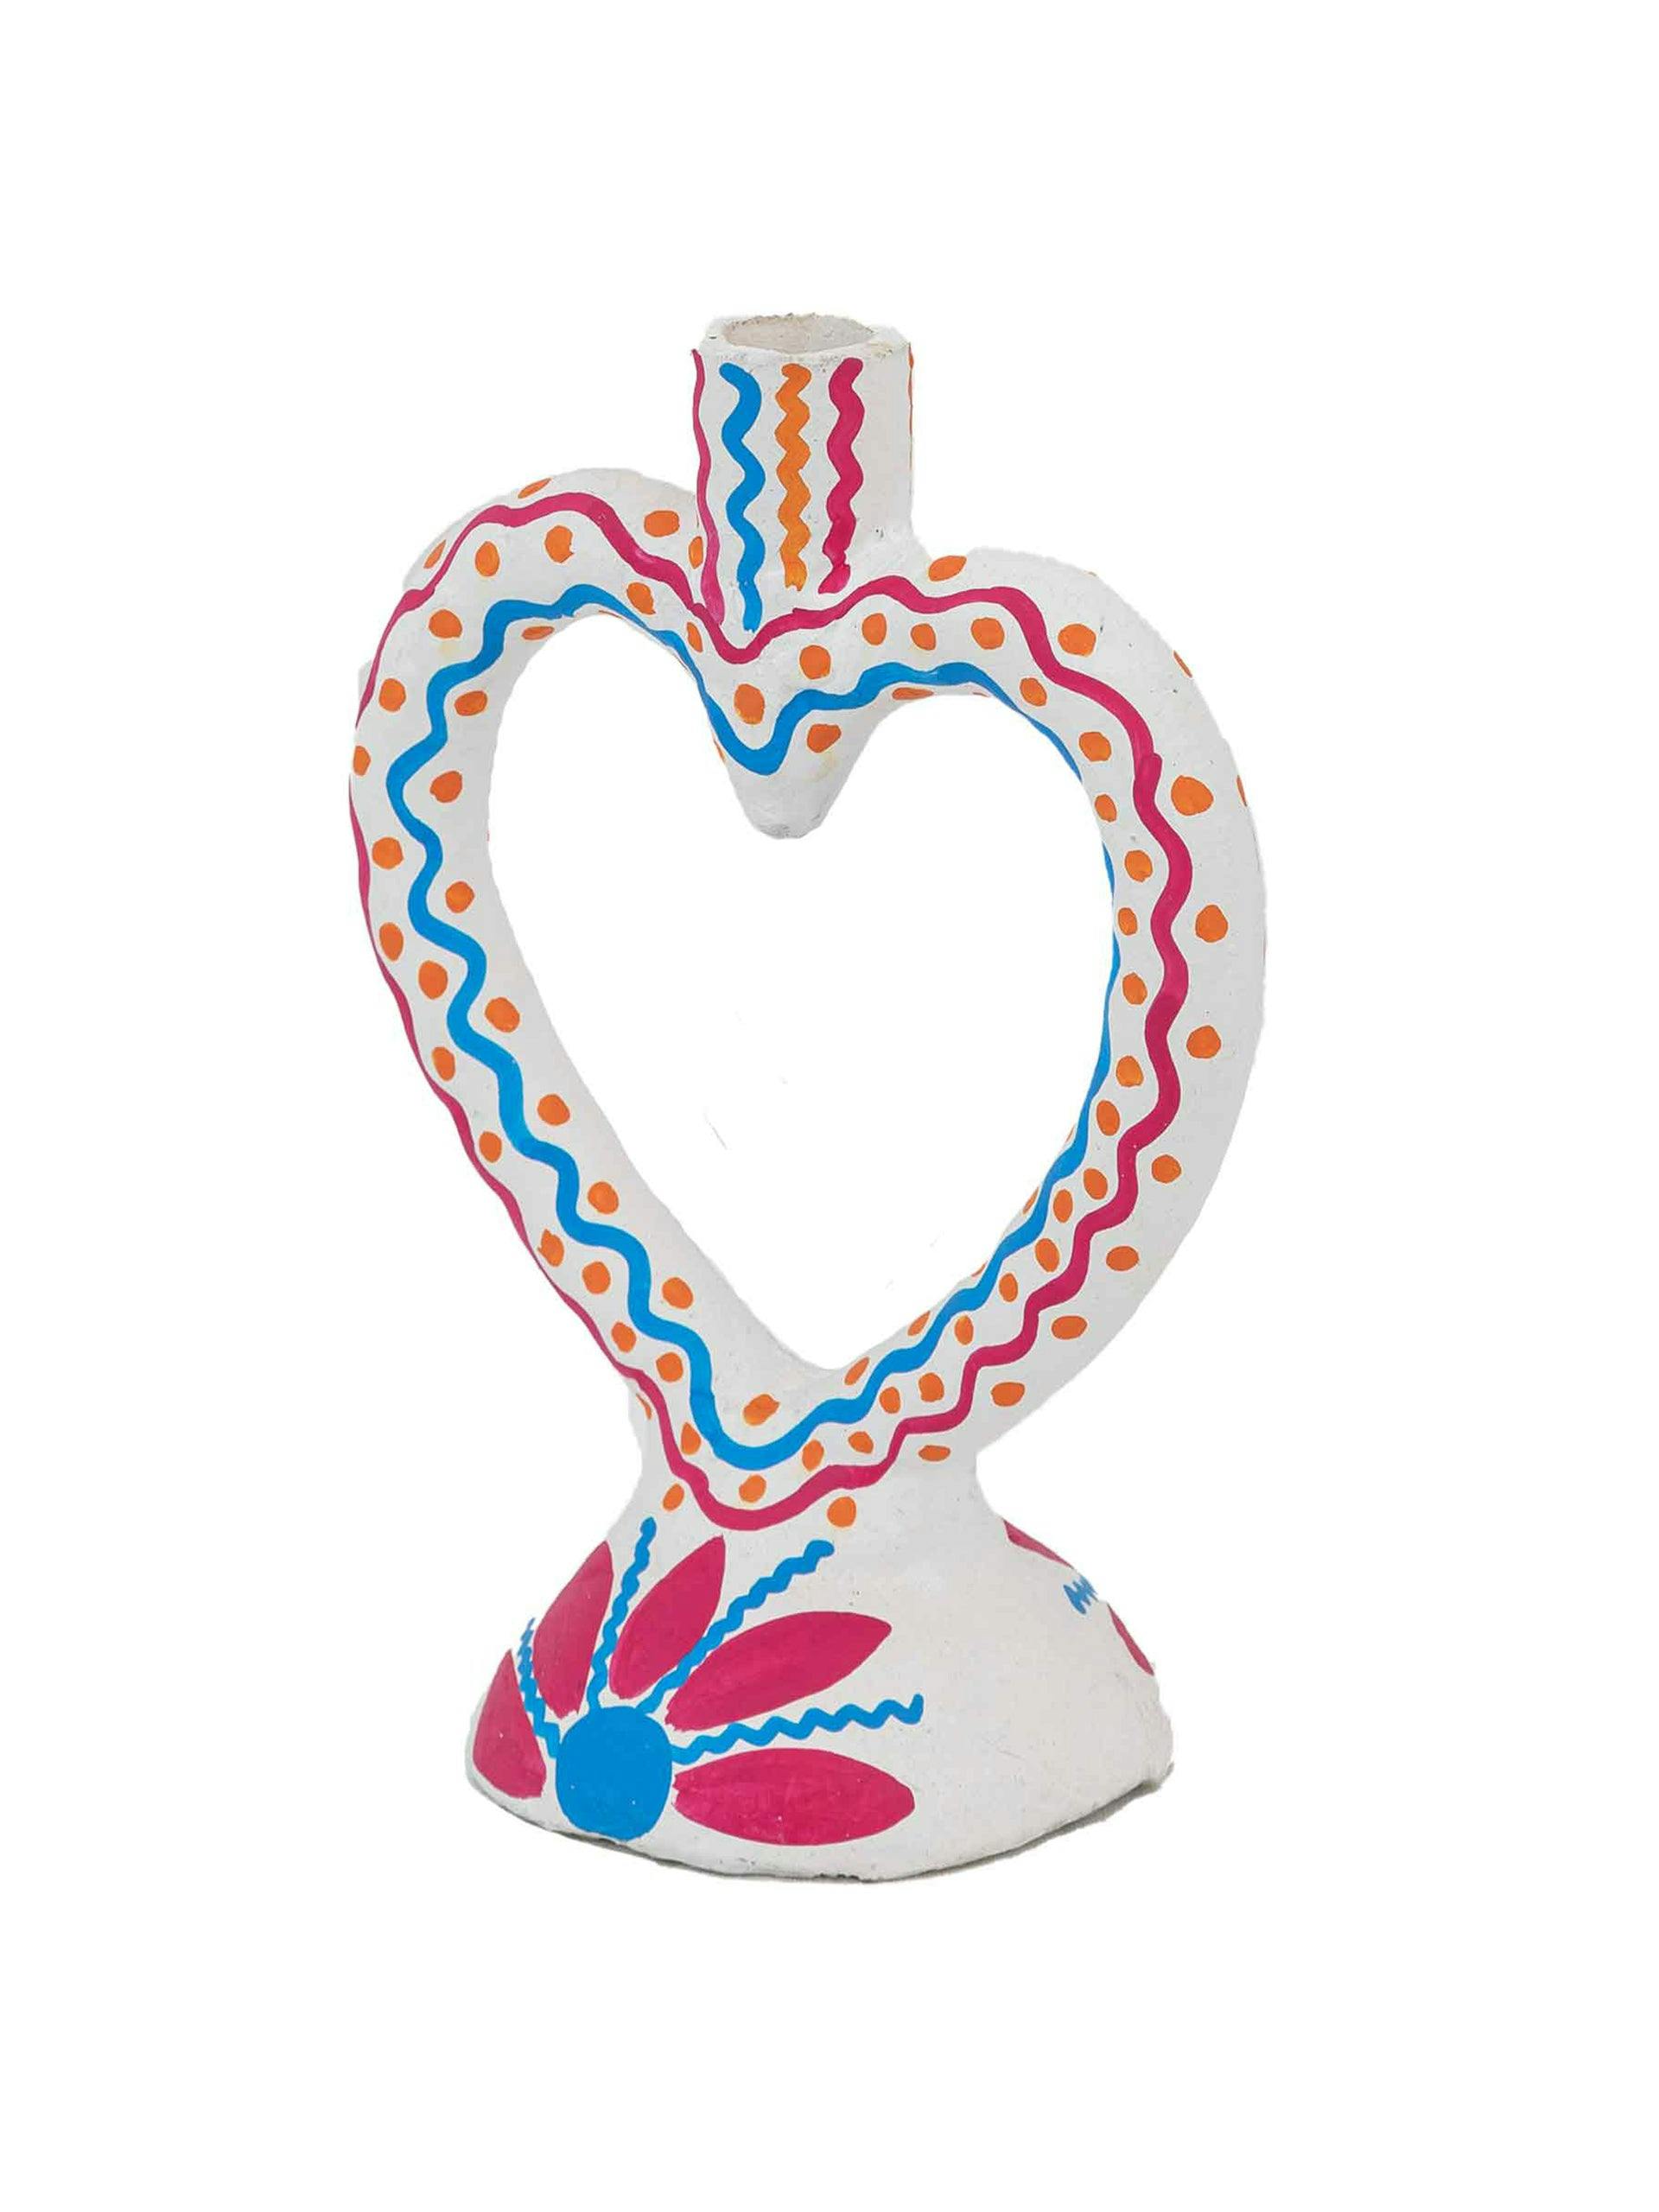 Red and blue Corazon candleholder